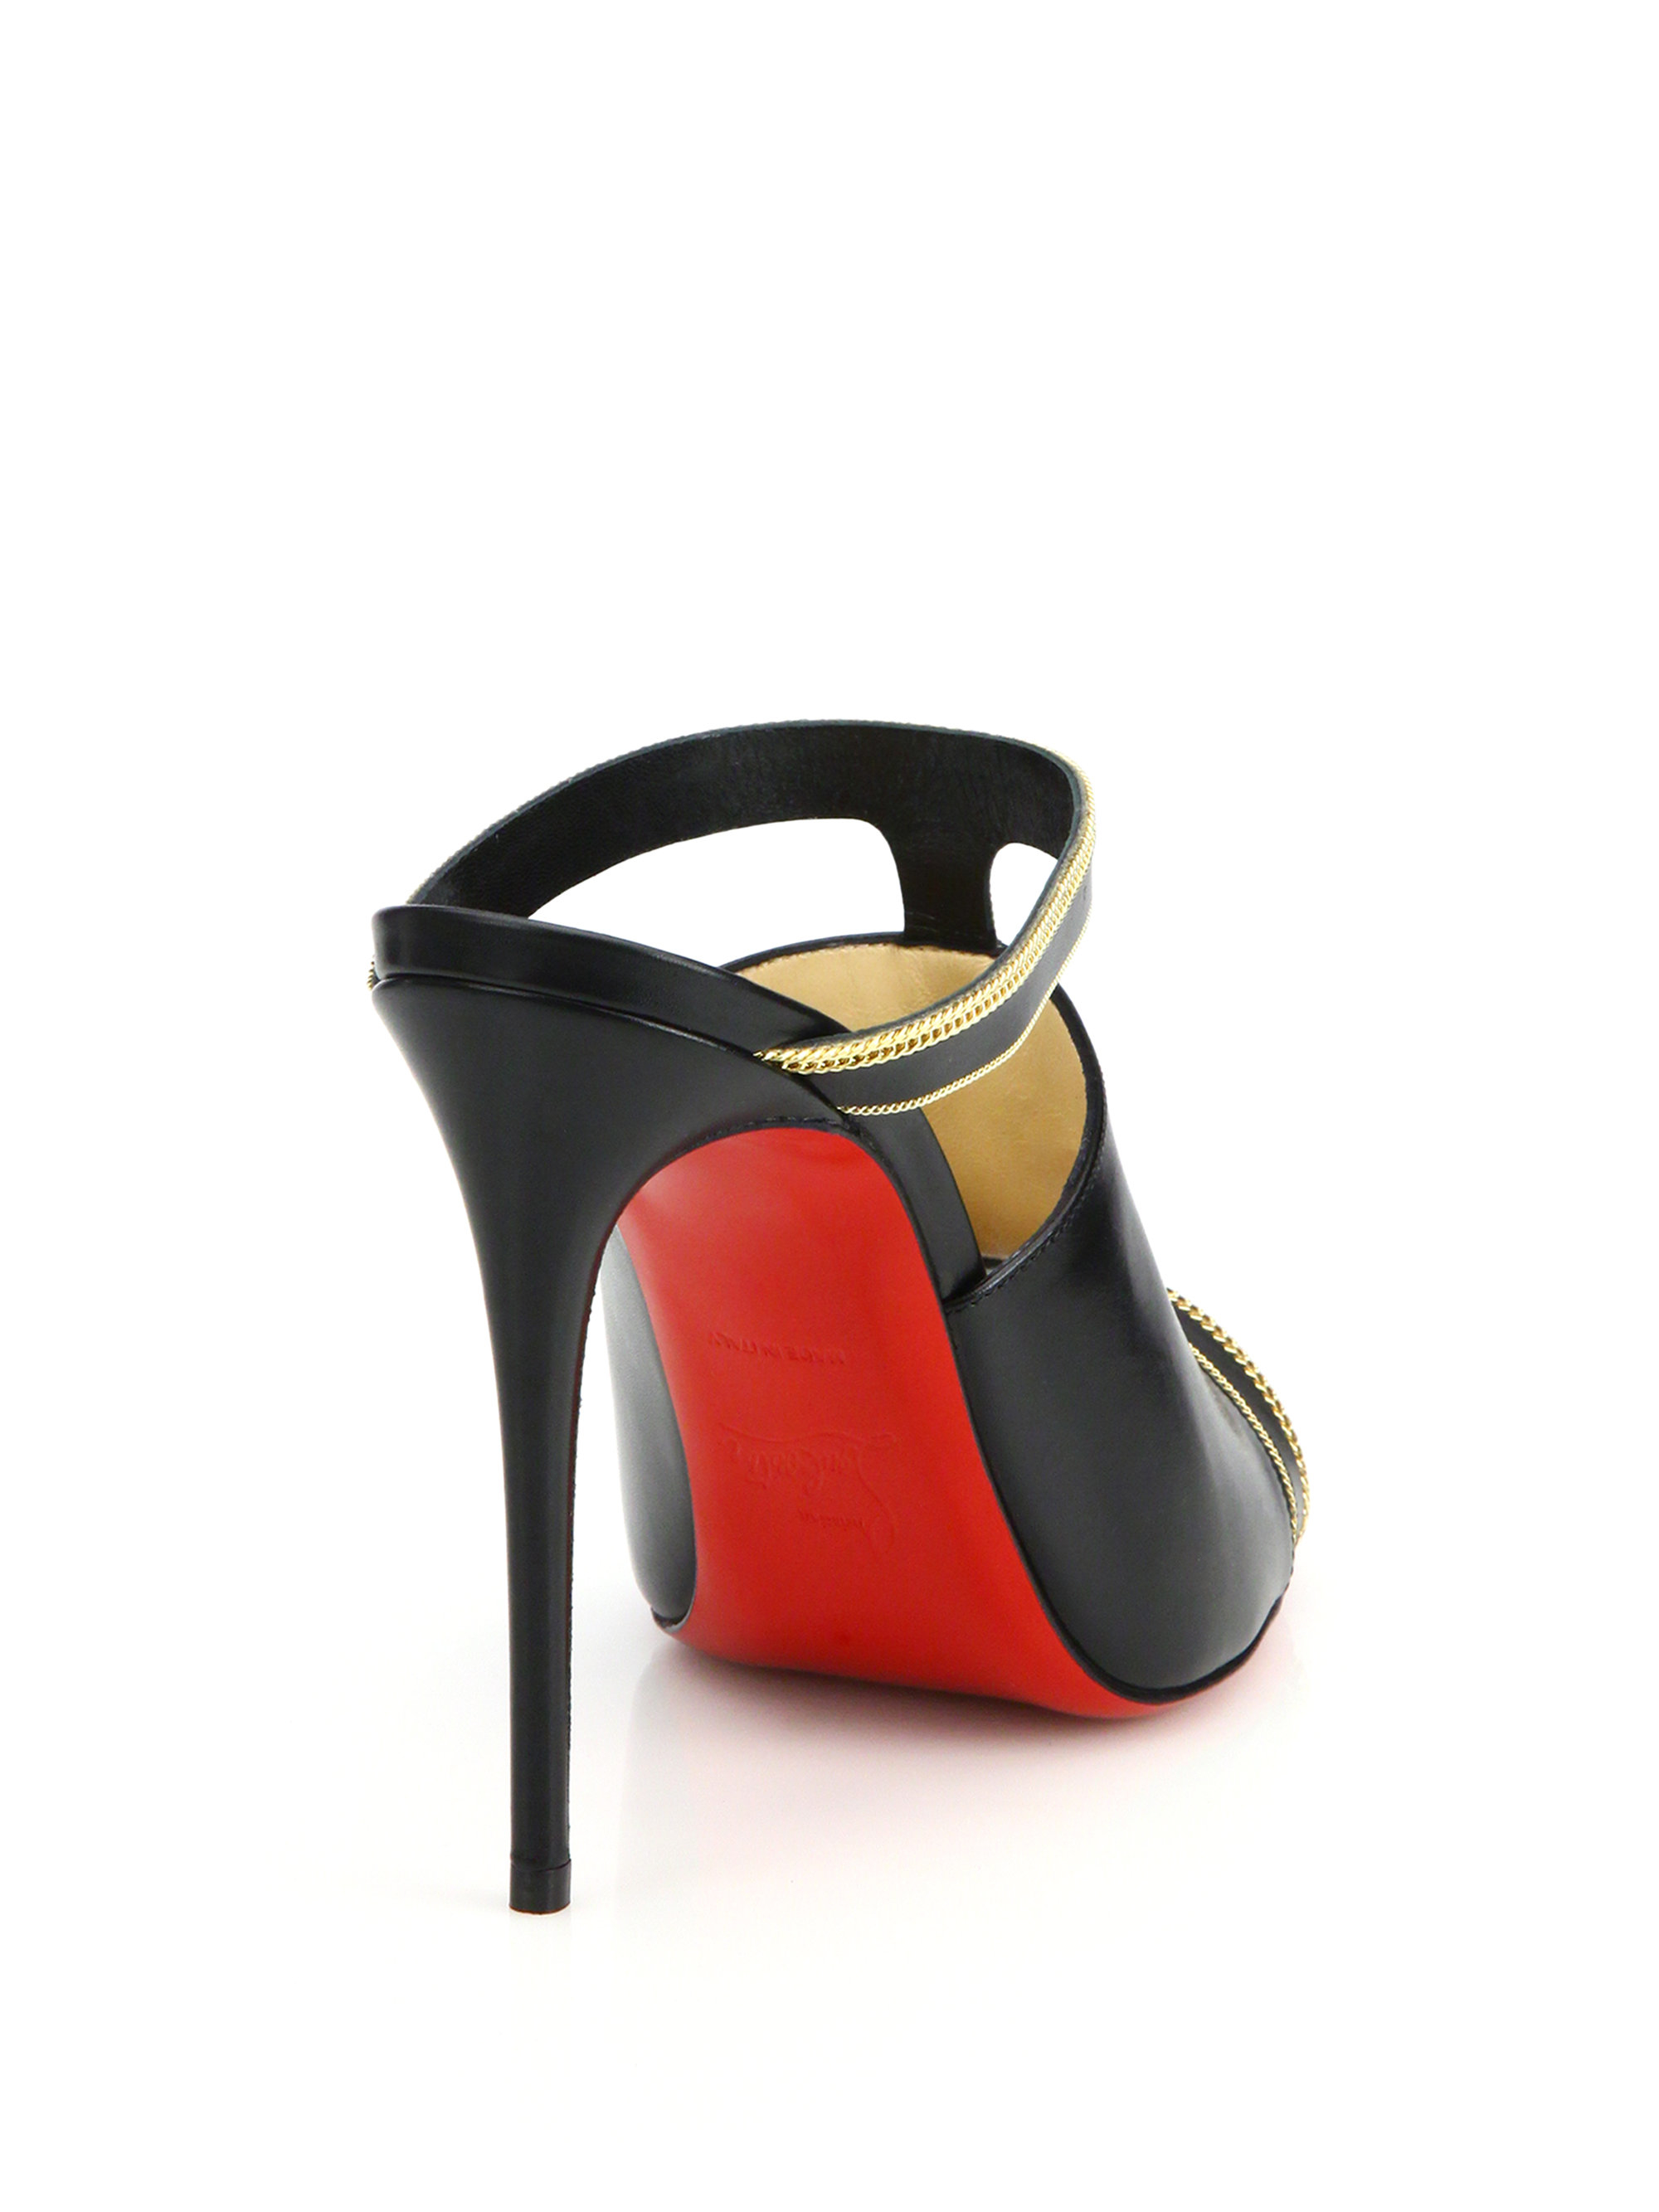 christian louboutin sandals Gold chain black patent leather ...